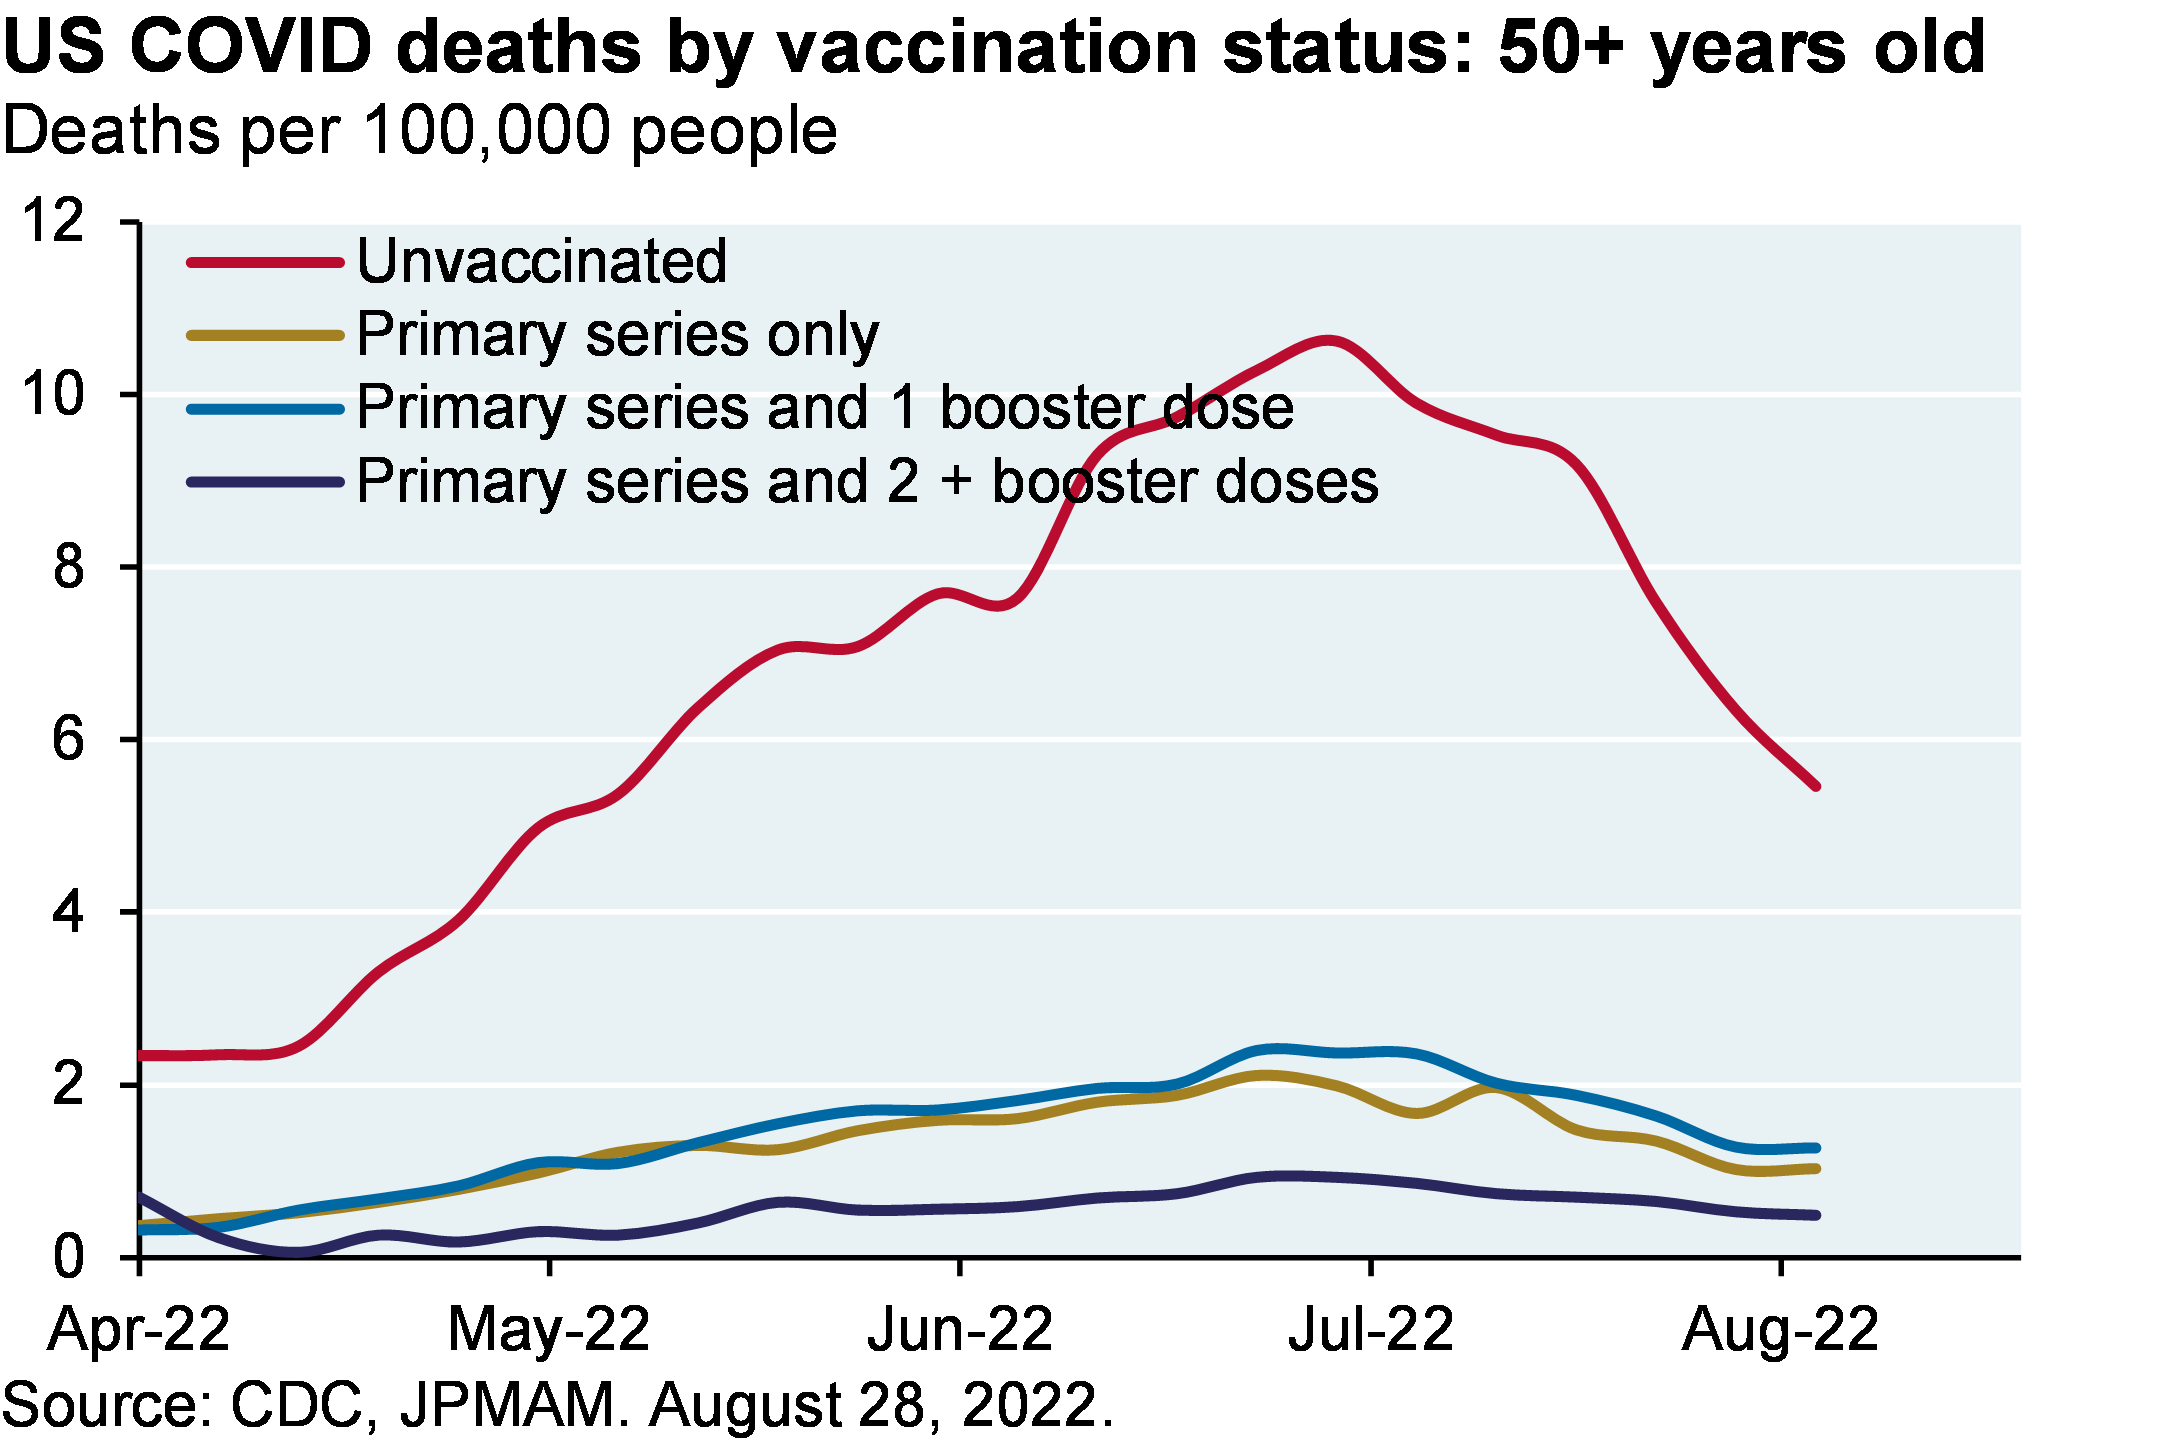 US COVID deaths by vaccination status: 50+ years old